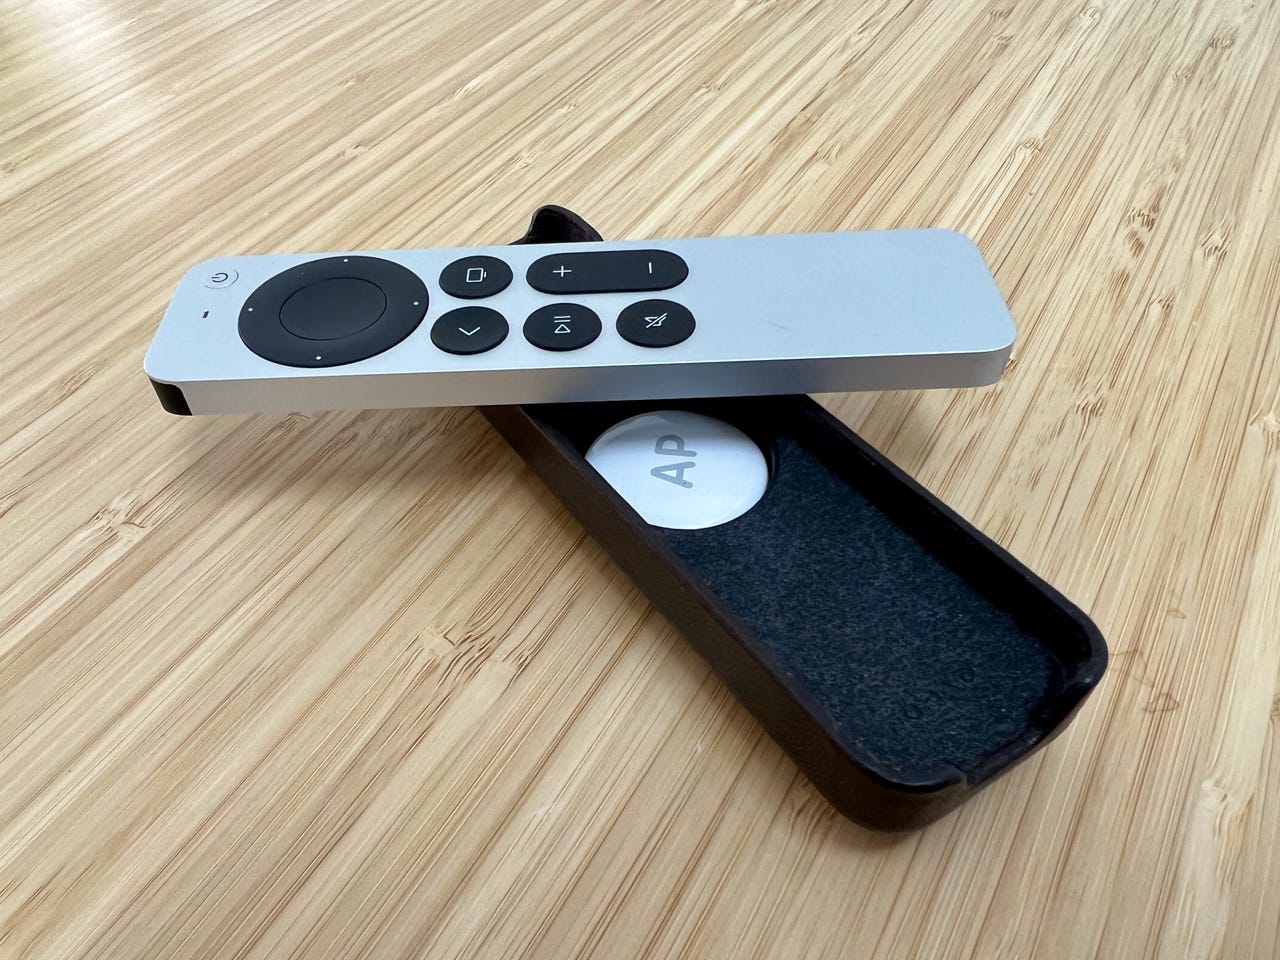 This accessory you add an AirTag to your Apple TV remote |